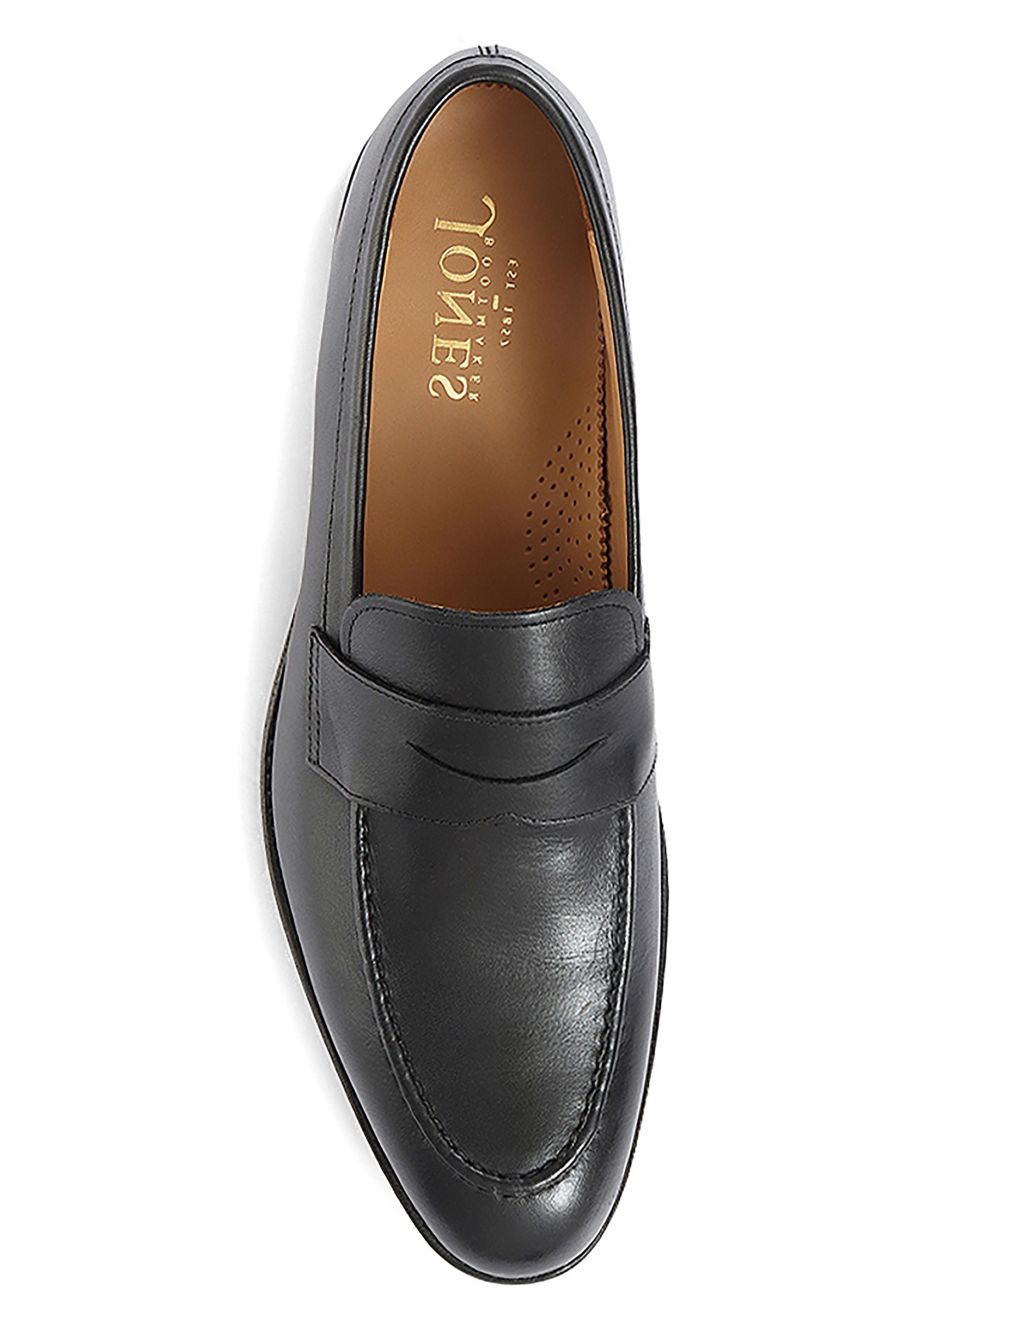 Leather Goodyear Welted Slip-On Loafers image 2